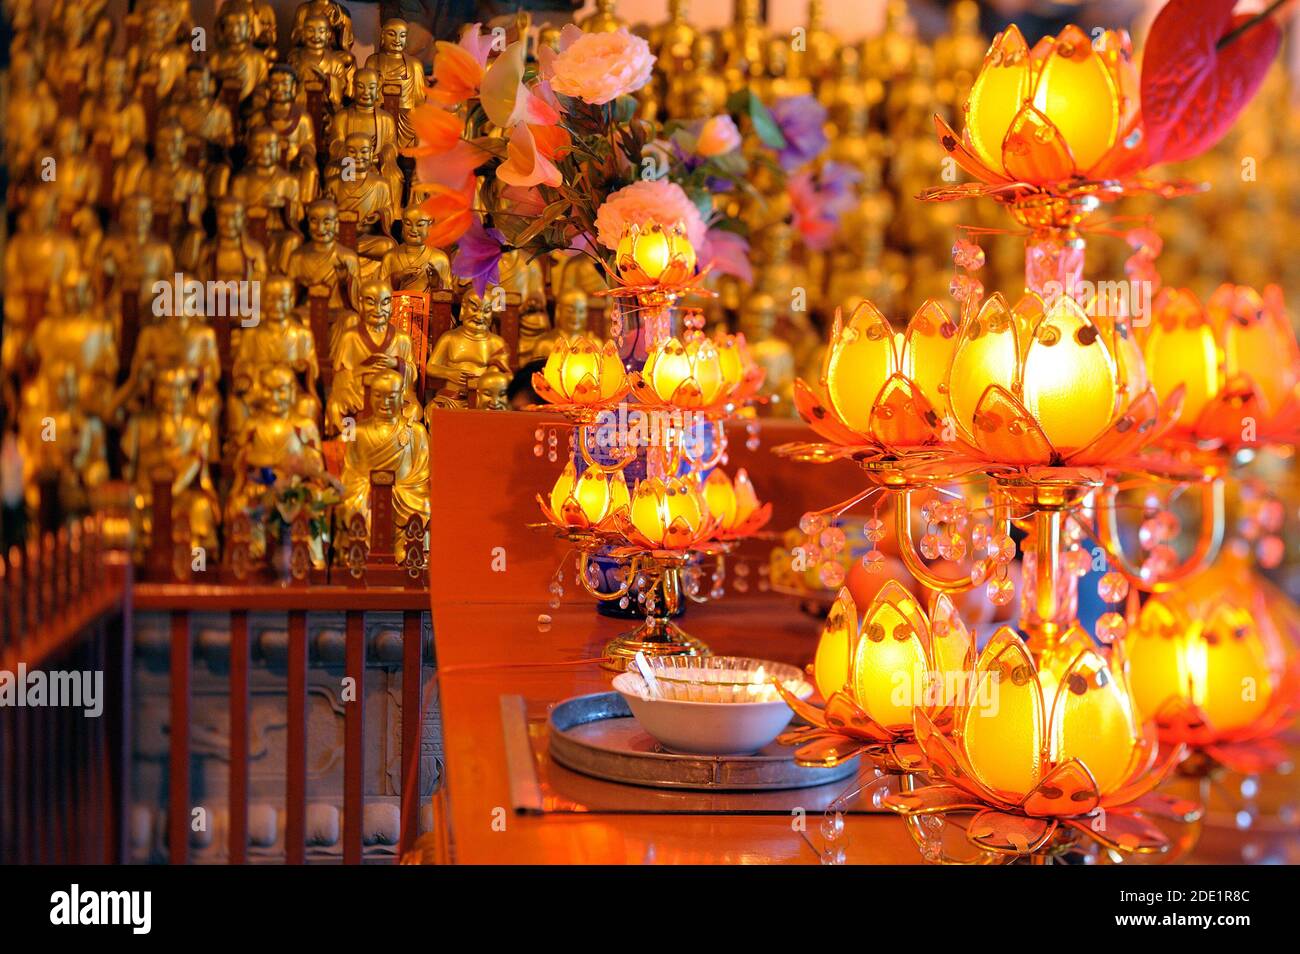 Golden statues of 500 Longhans and offerings in Longhua Buddhist temple. Stock Photo